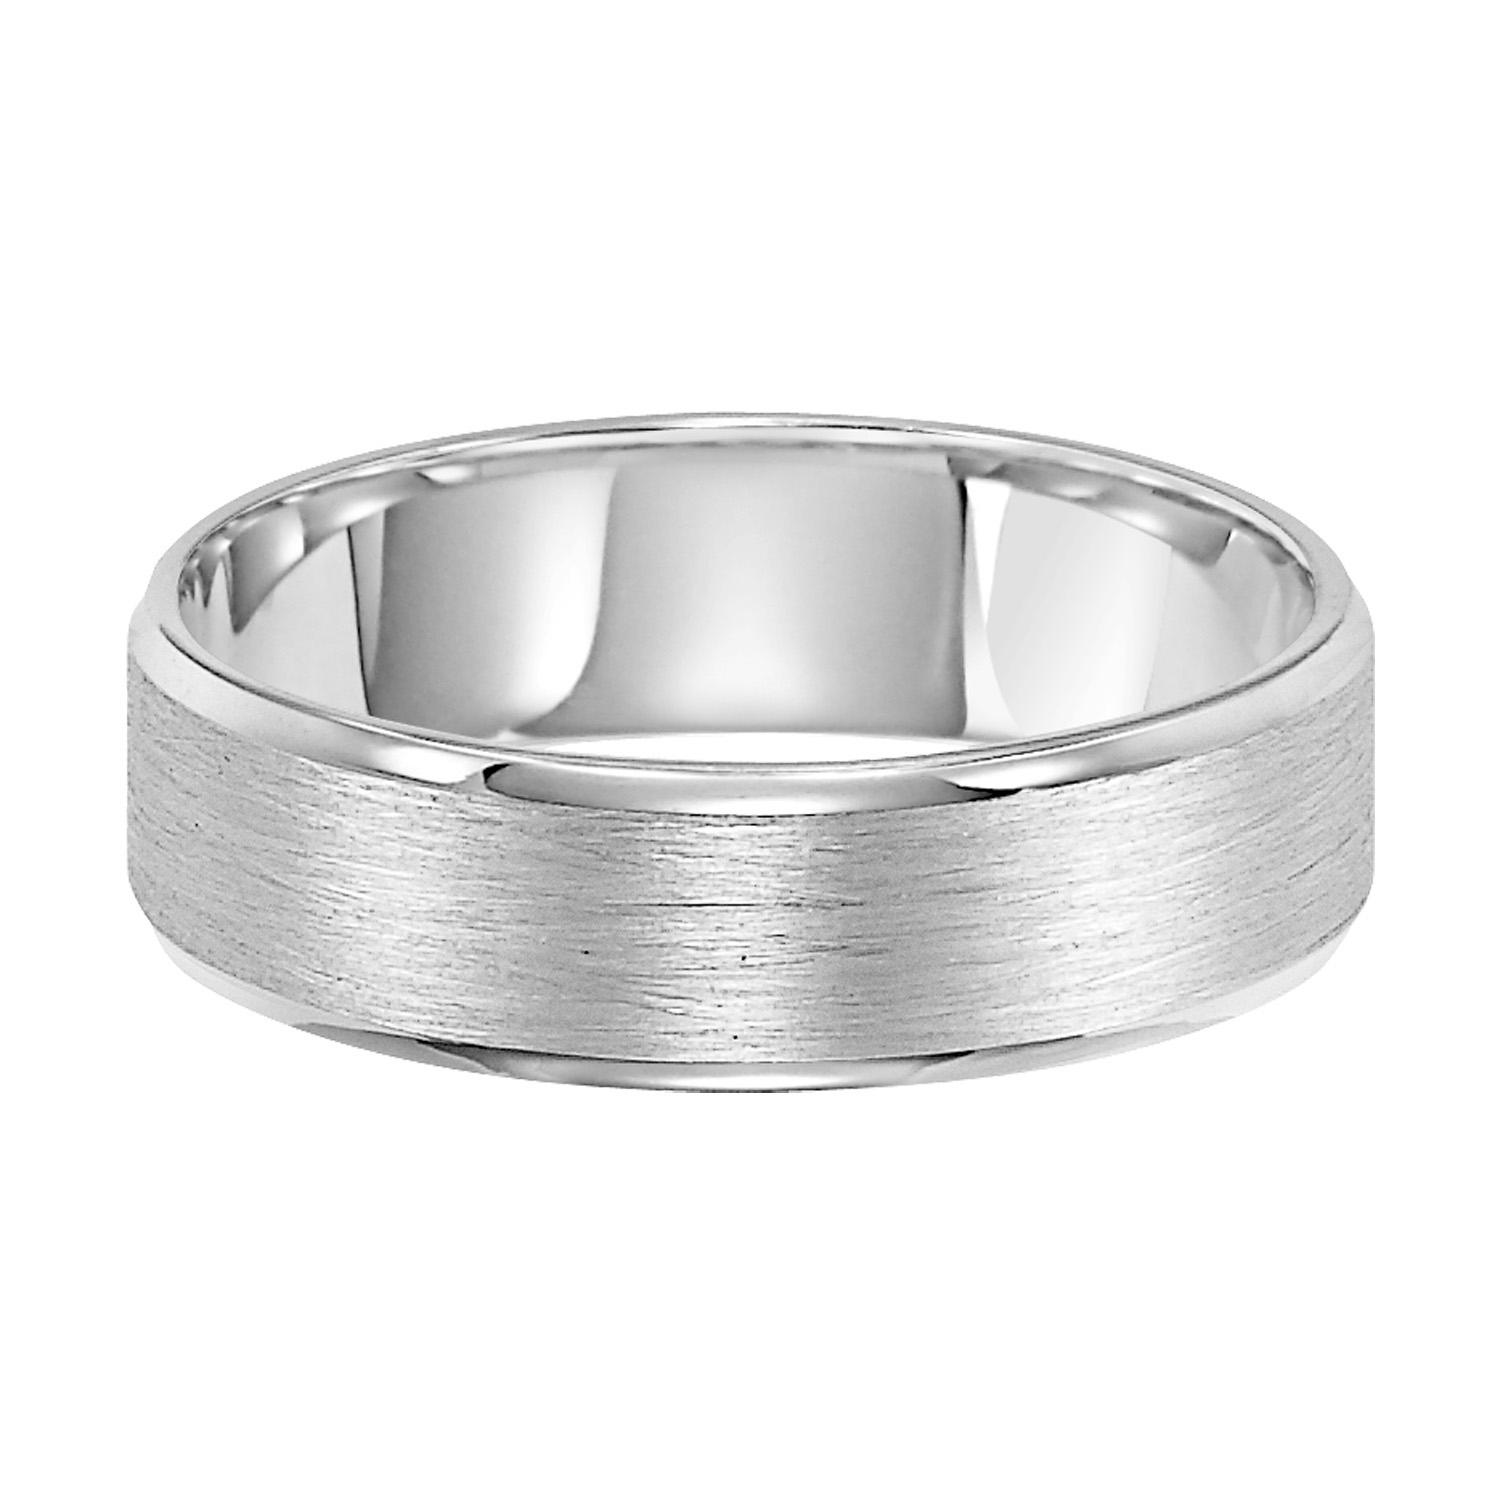 Gents White Gold Comfort Fit Satin Finish Wedding Band